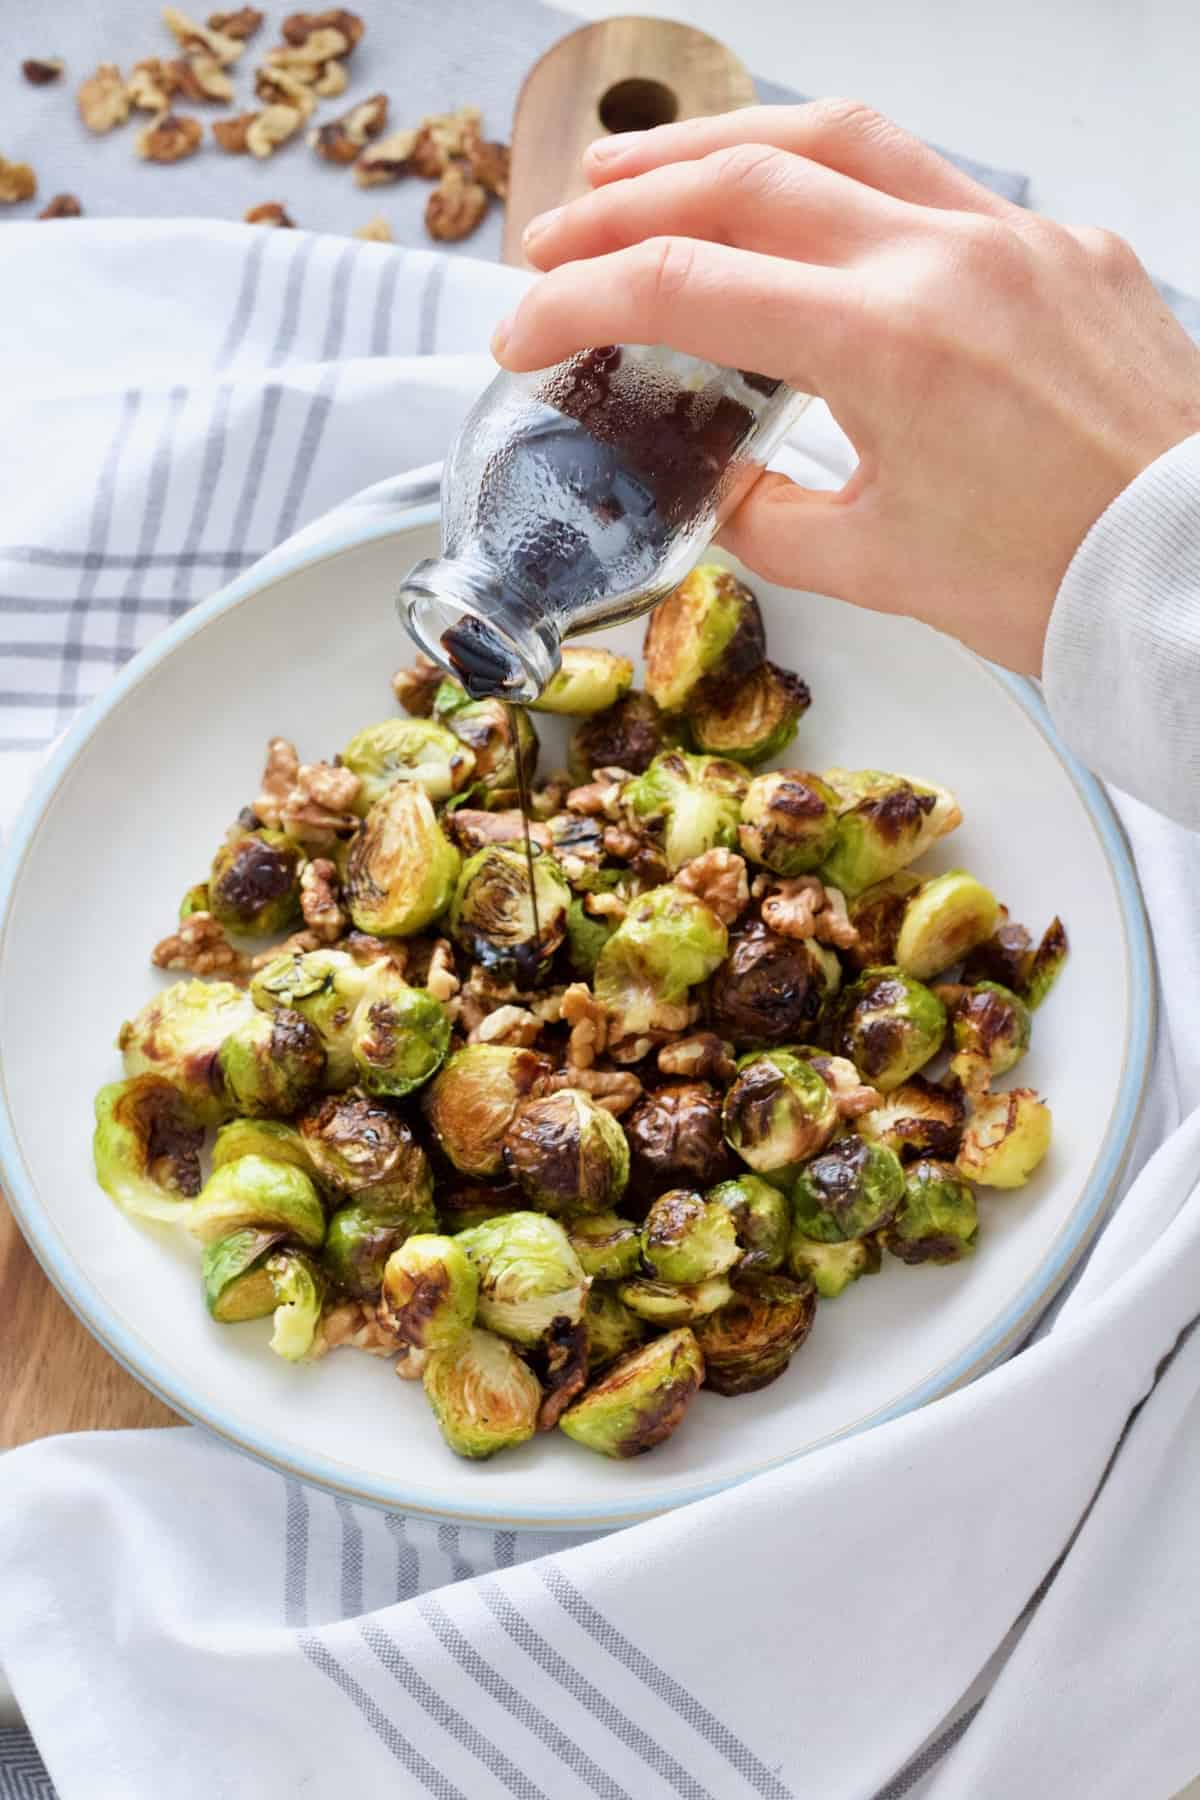 Hand pouring balsamic vinegar & maple reduction over roasted Brussels sprouts.